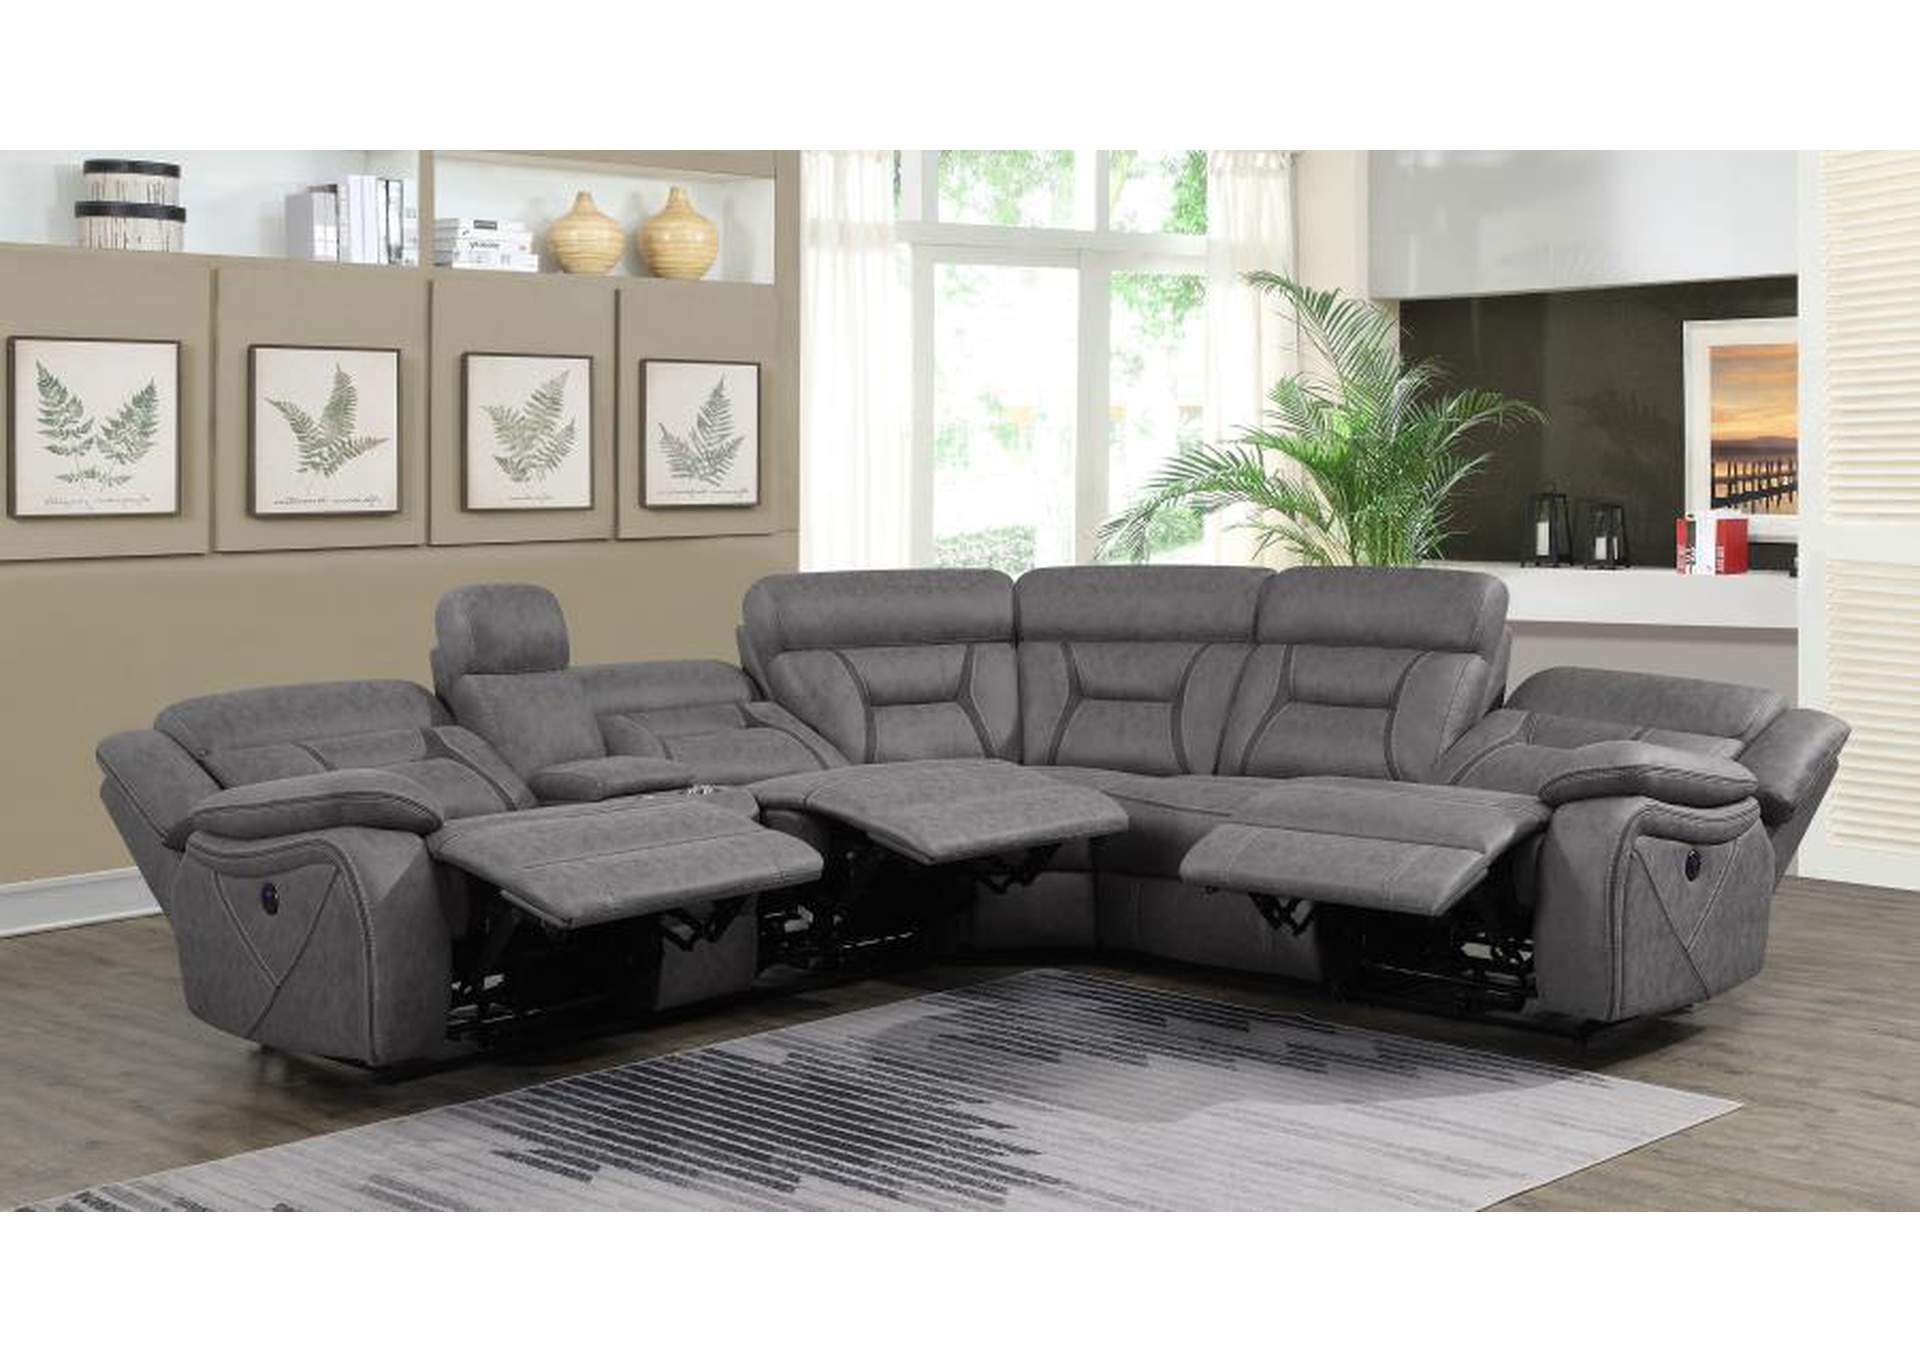 Higgins Four-Piece Upholstered Power Sectional Grey,Coaster Furniture